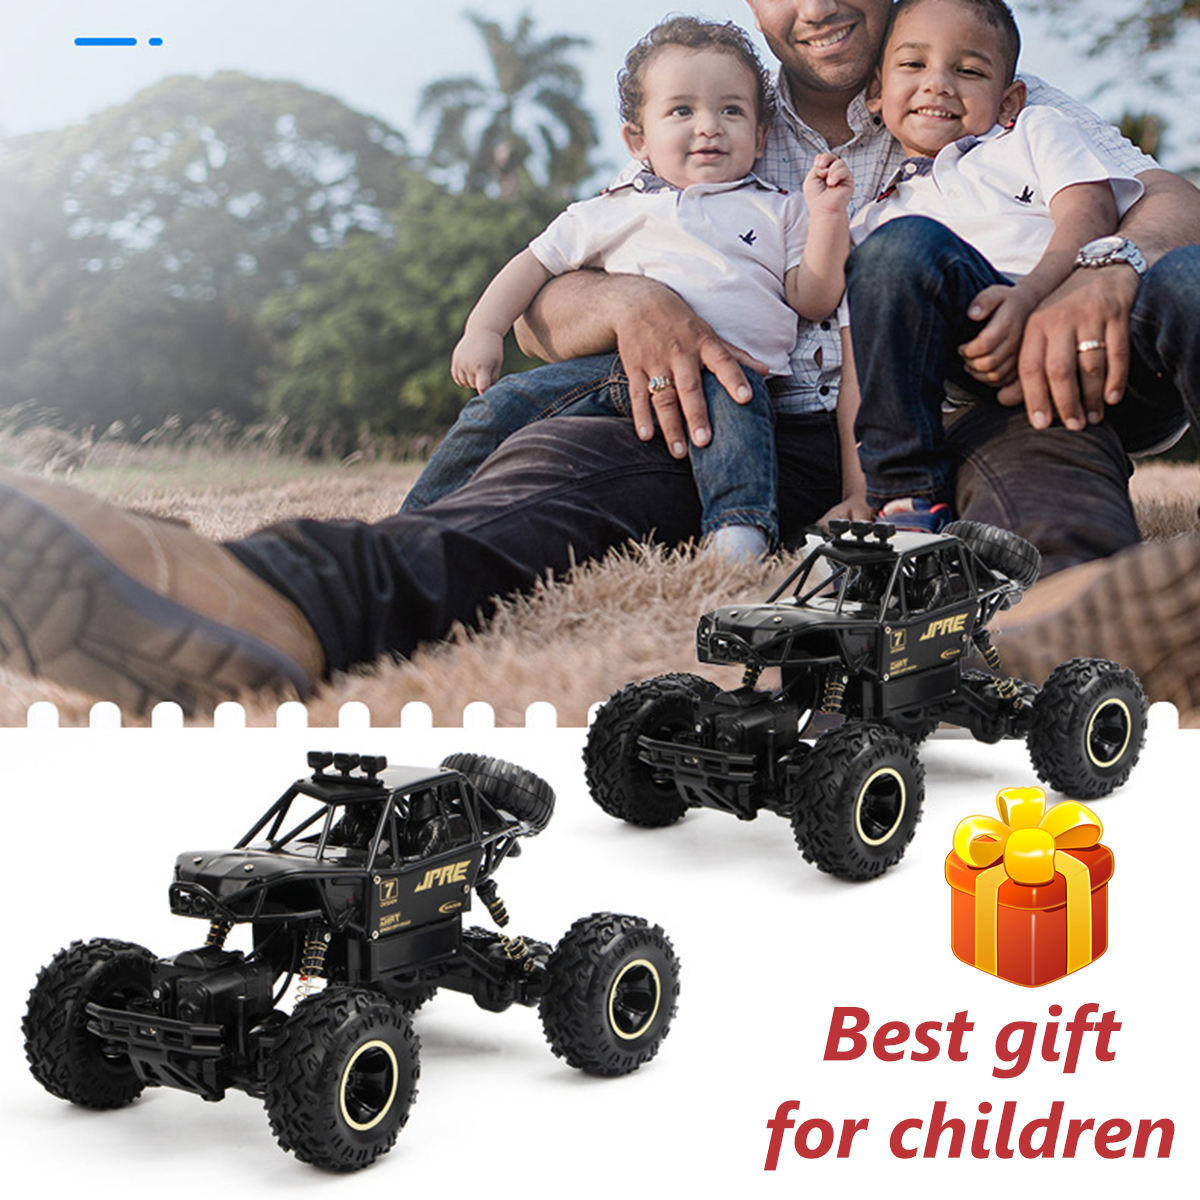 1:16 Alloy Remote Controls Car Monster Trucks, 4WD Climbing RC Cars Off Road, RC Crawler Toys for Boys Kids Gifts - image 3 of 11